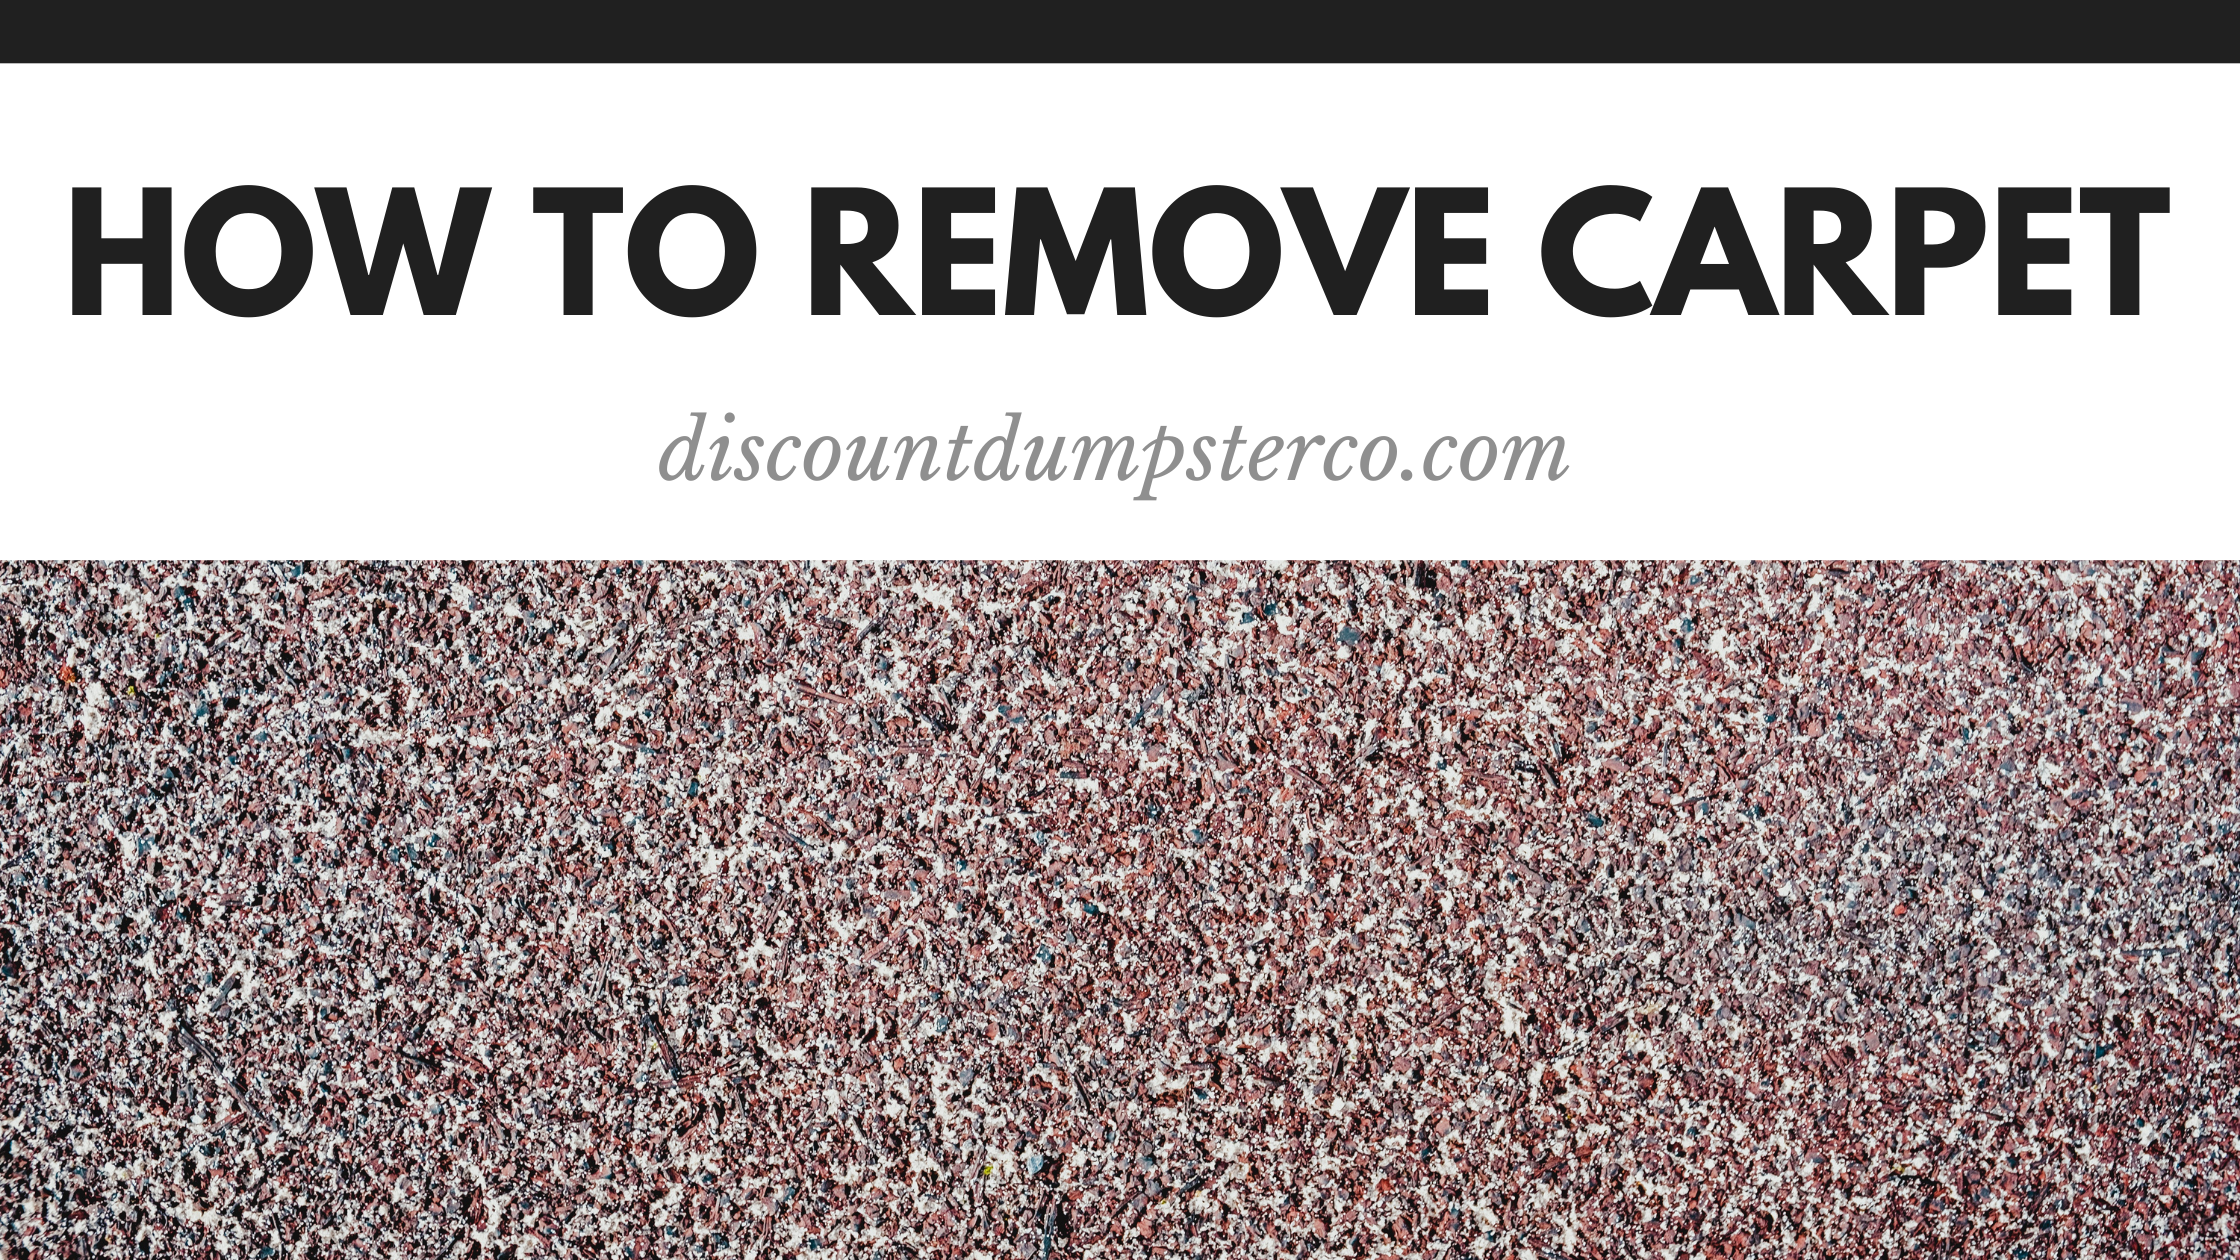 Carpet Padding Guide to Asbestos, Mold, Odor Problems, Solutions